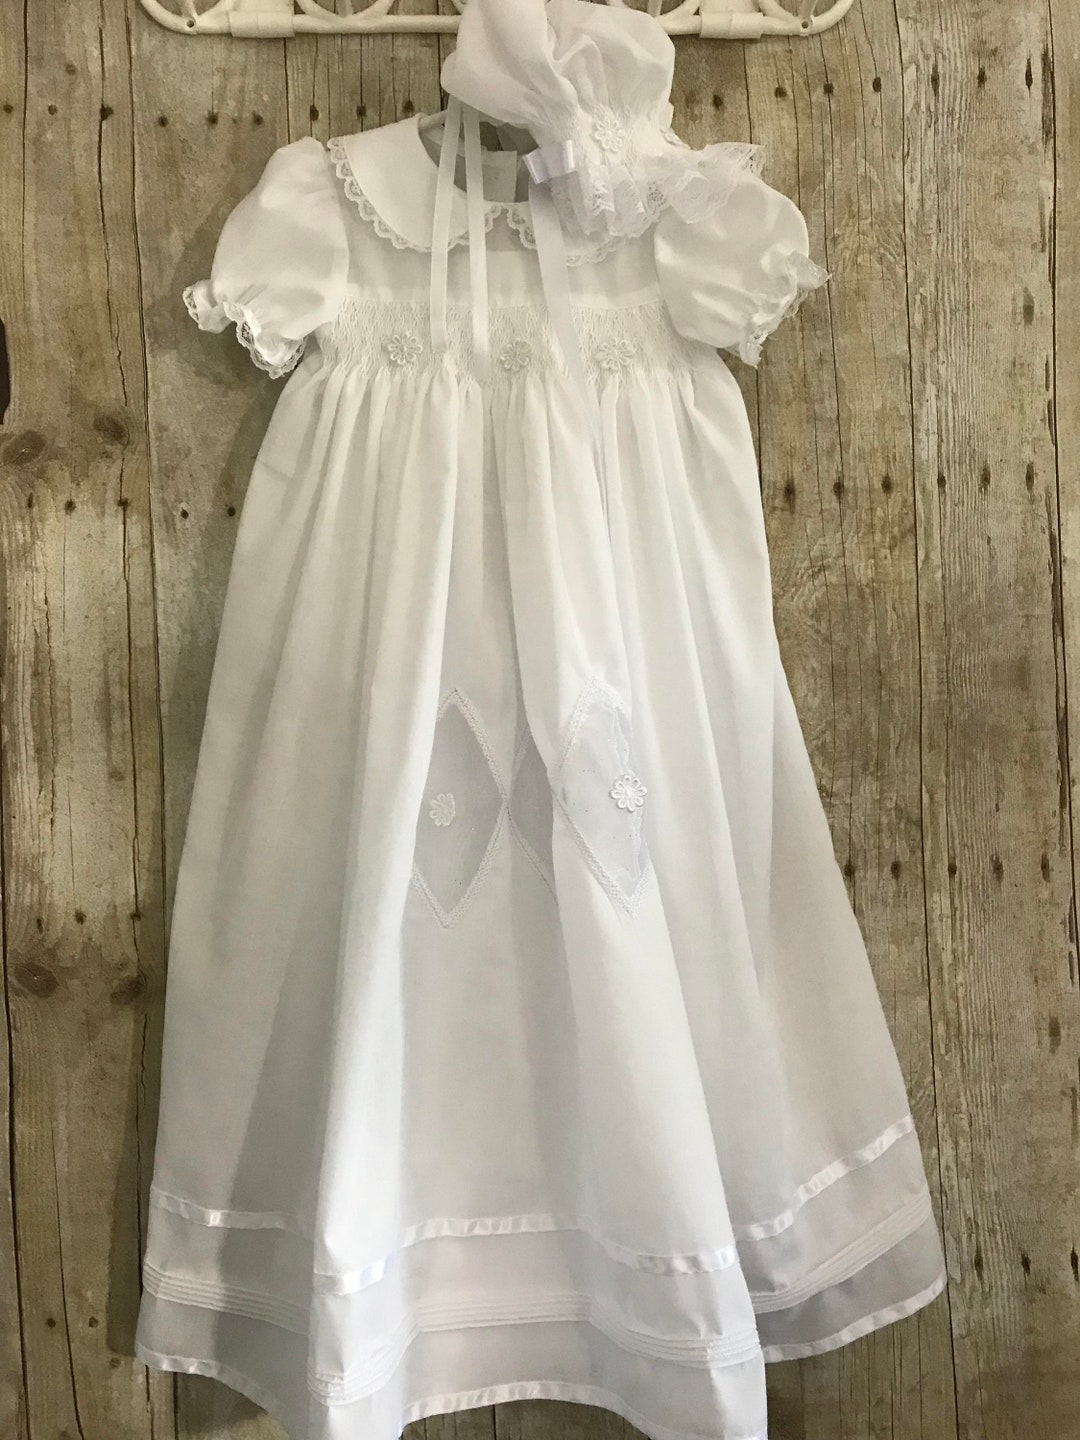 Smocked 3 Piece Christening Outfit for Baby Girl - Etsy